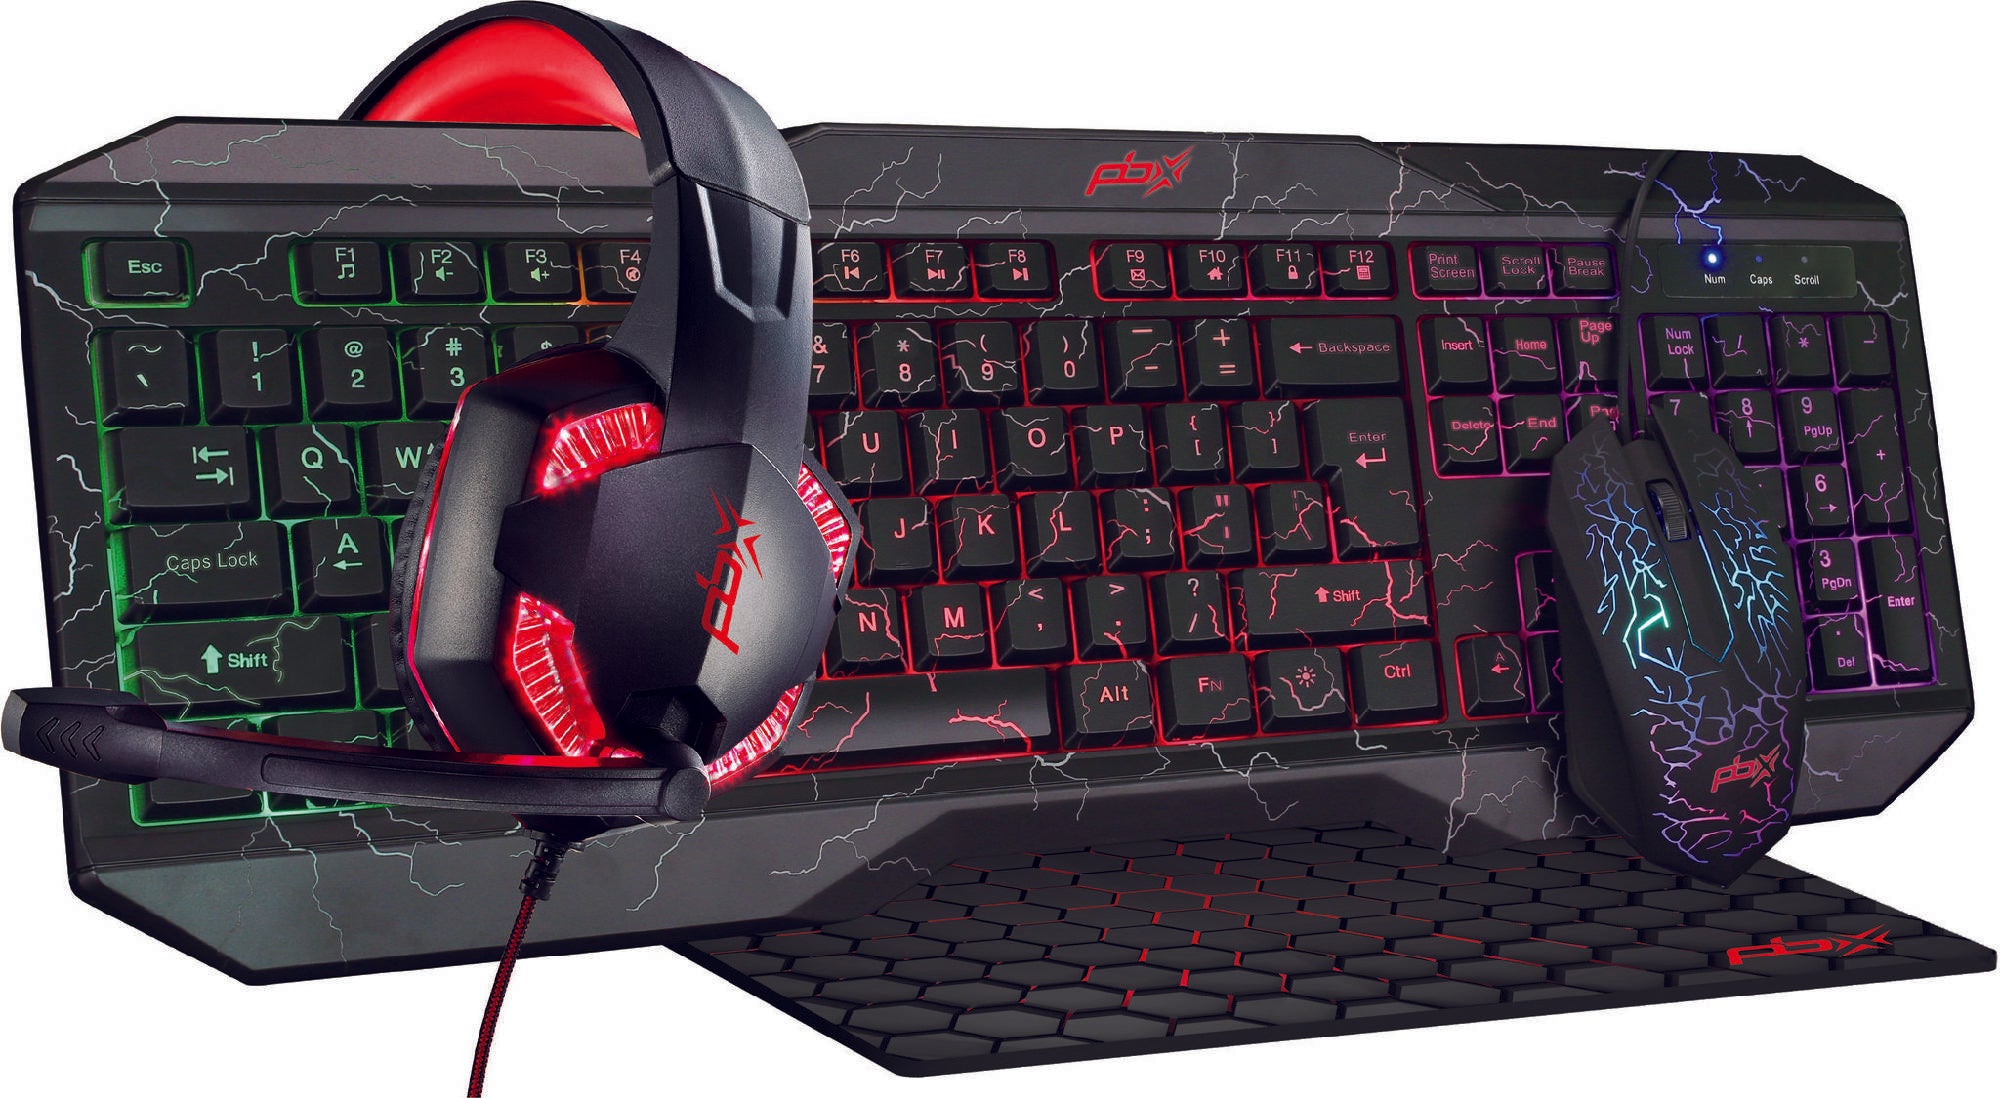 Gaming keyboard with multicolored backlighting and a headset with red accents placed on top, both on a 4-IN-1 Pro Gaming Kit Headphones Keyboard Mouse - Mousepad, against a dark background.